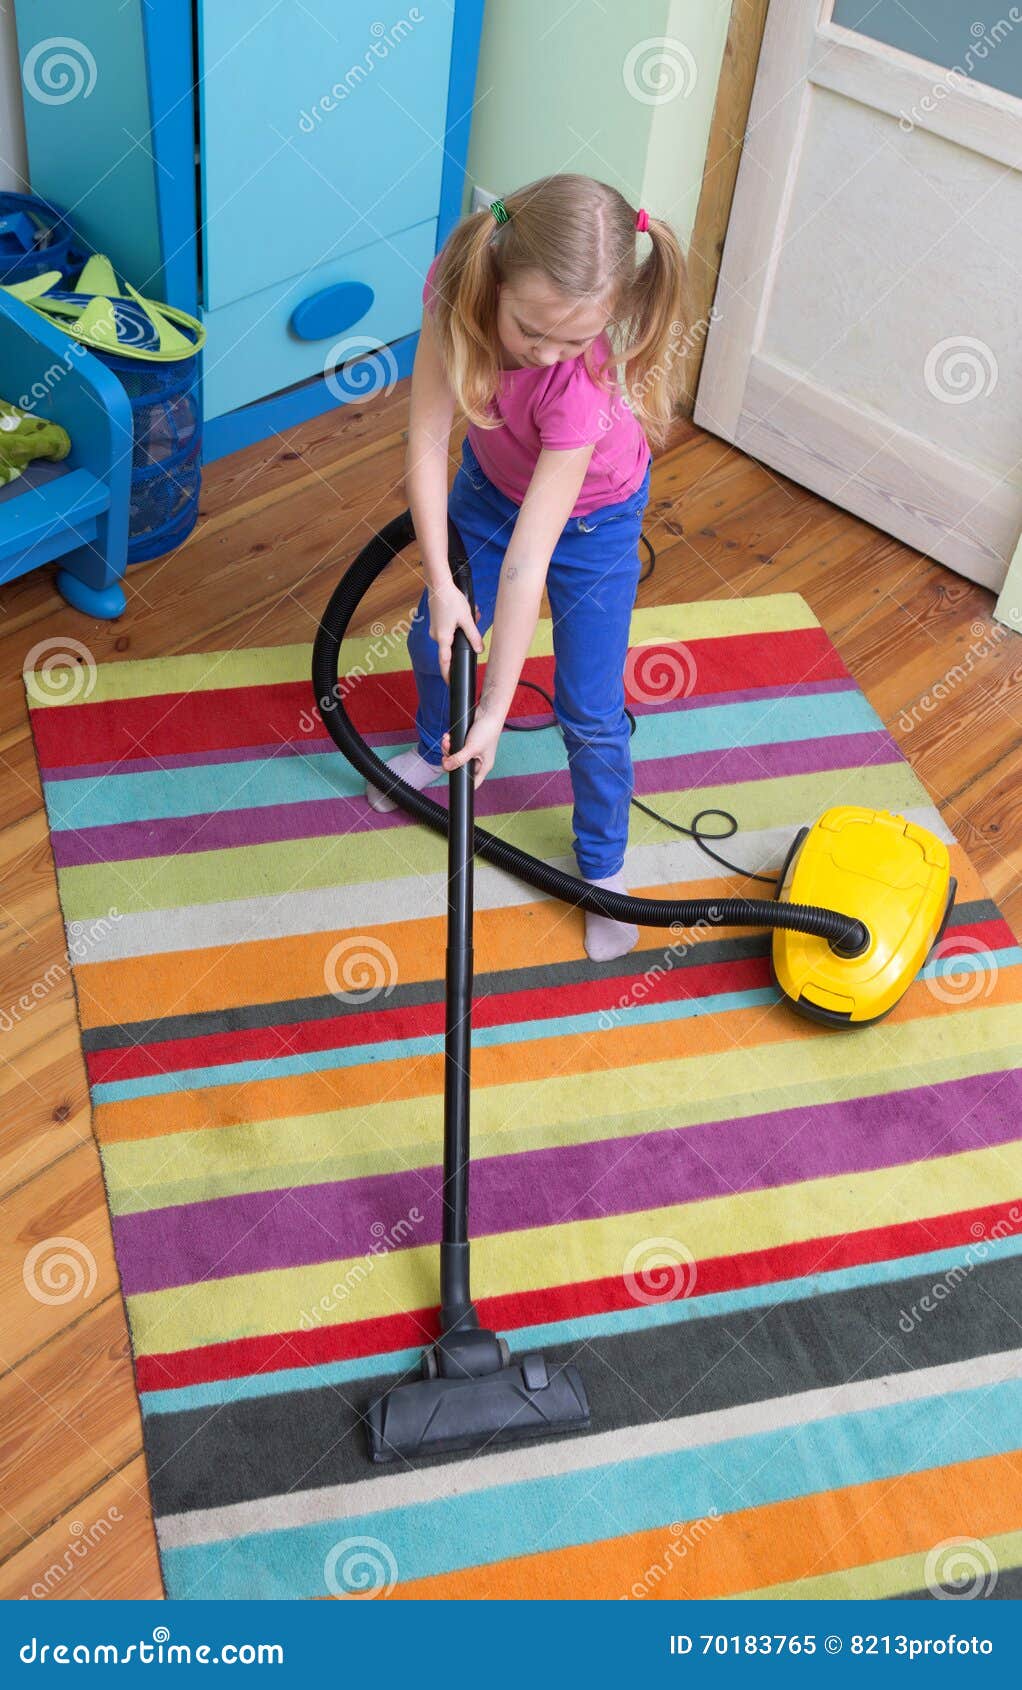 Girl Cleaning Floor With Hoover Stock Image Image Of Housewife